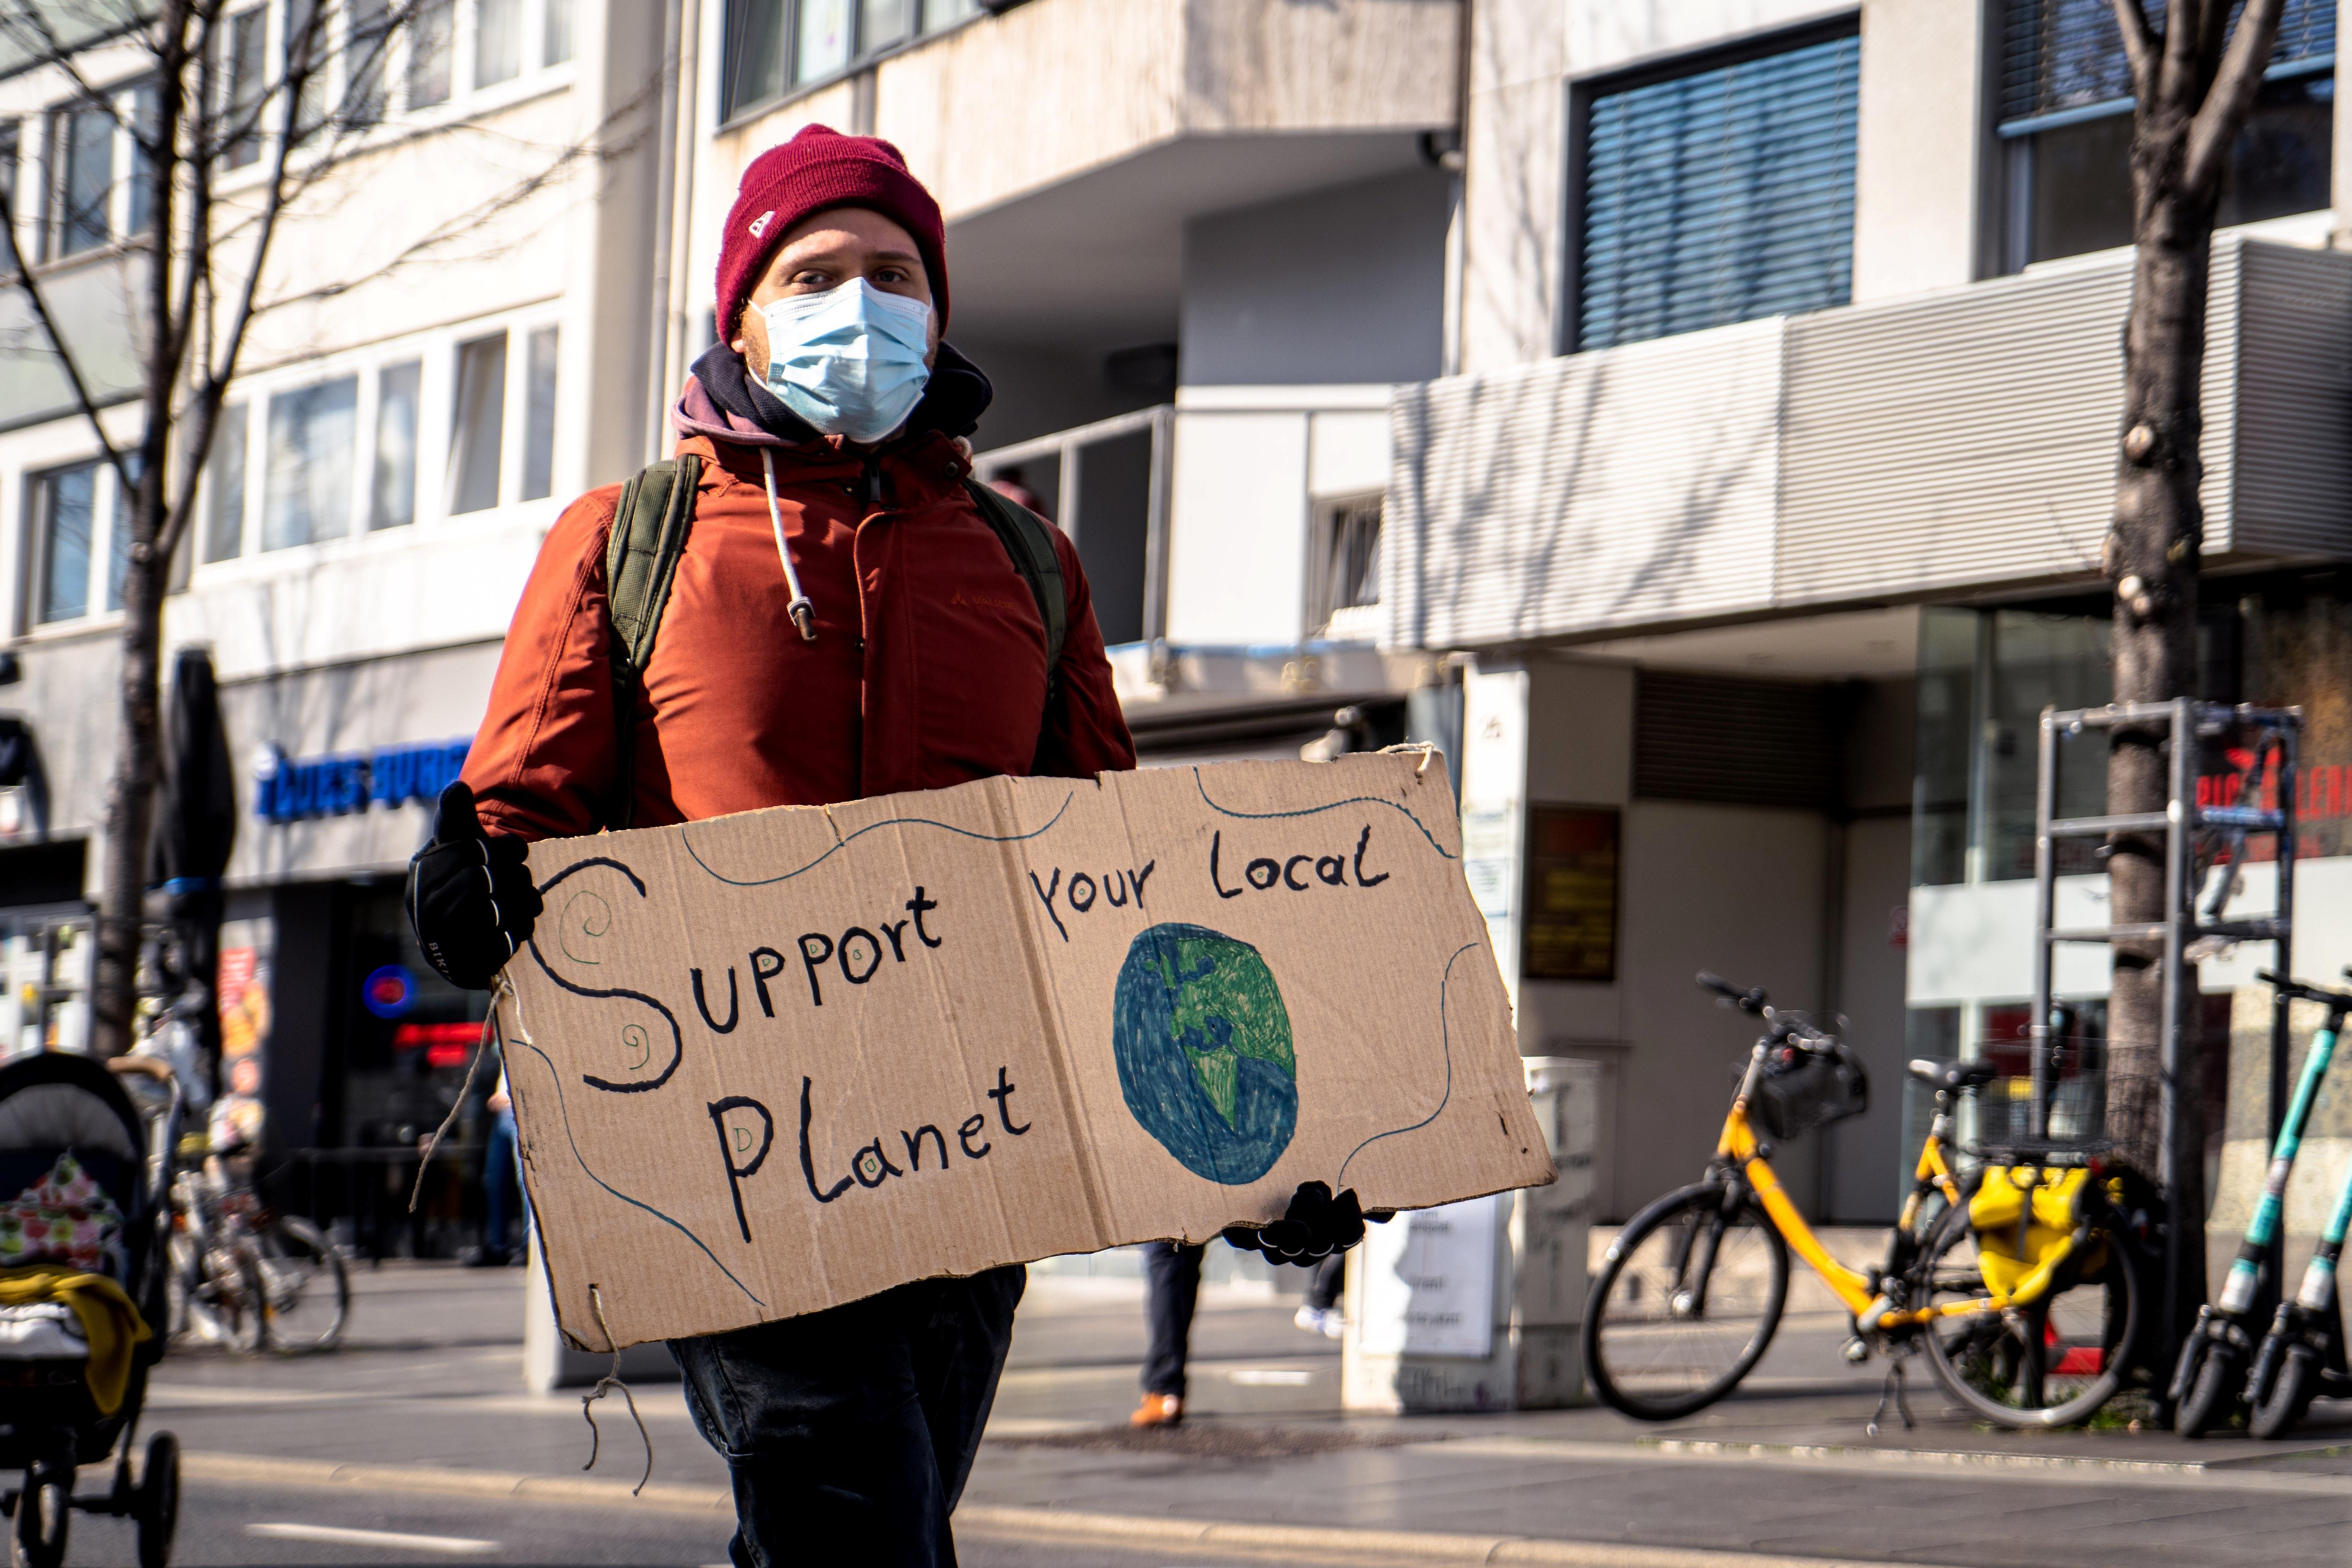 Protester carries placard saying "Support Planet"